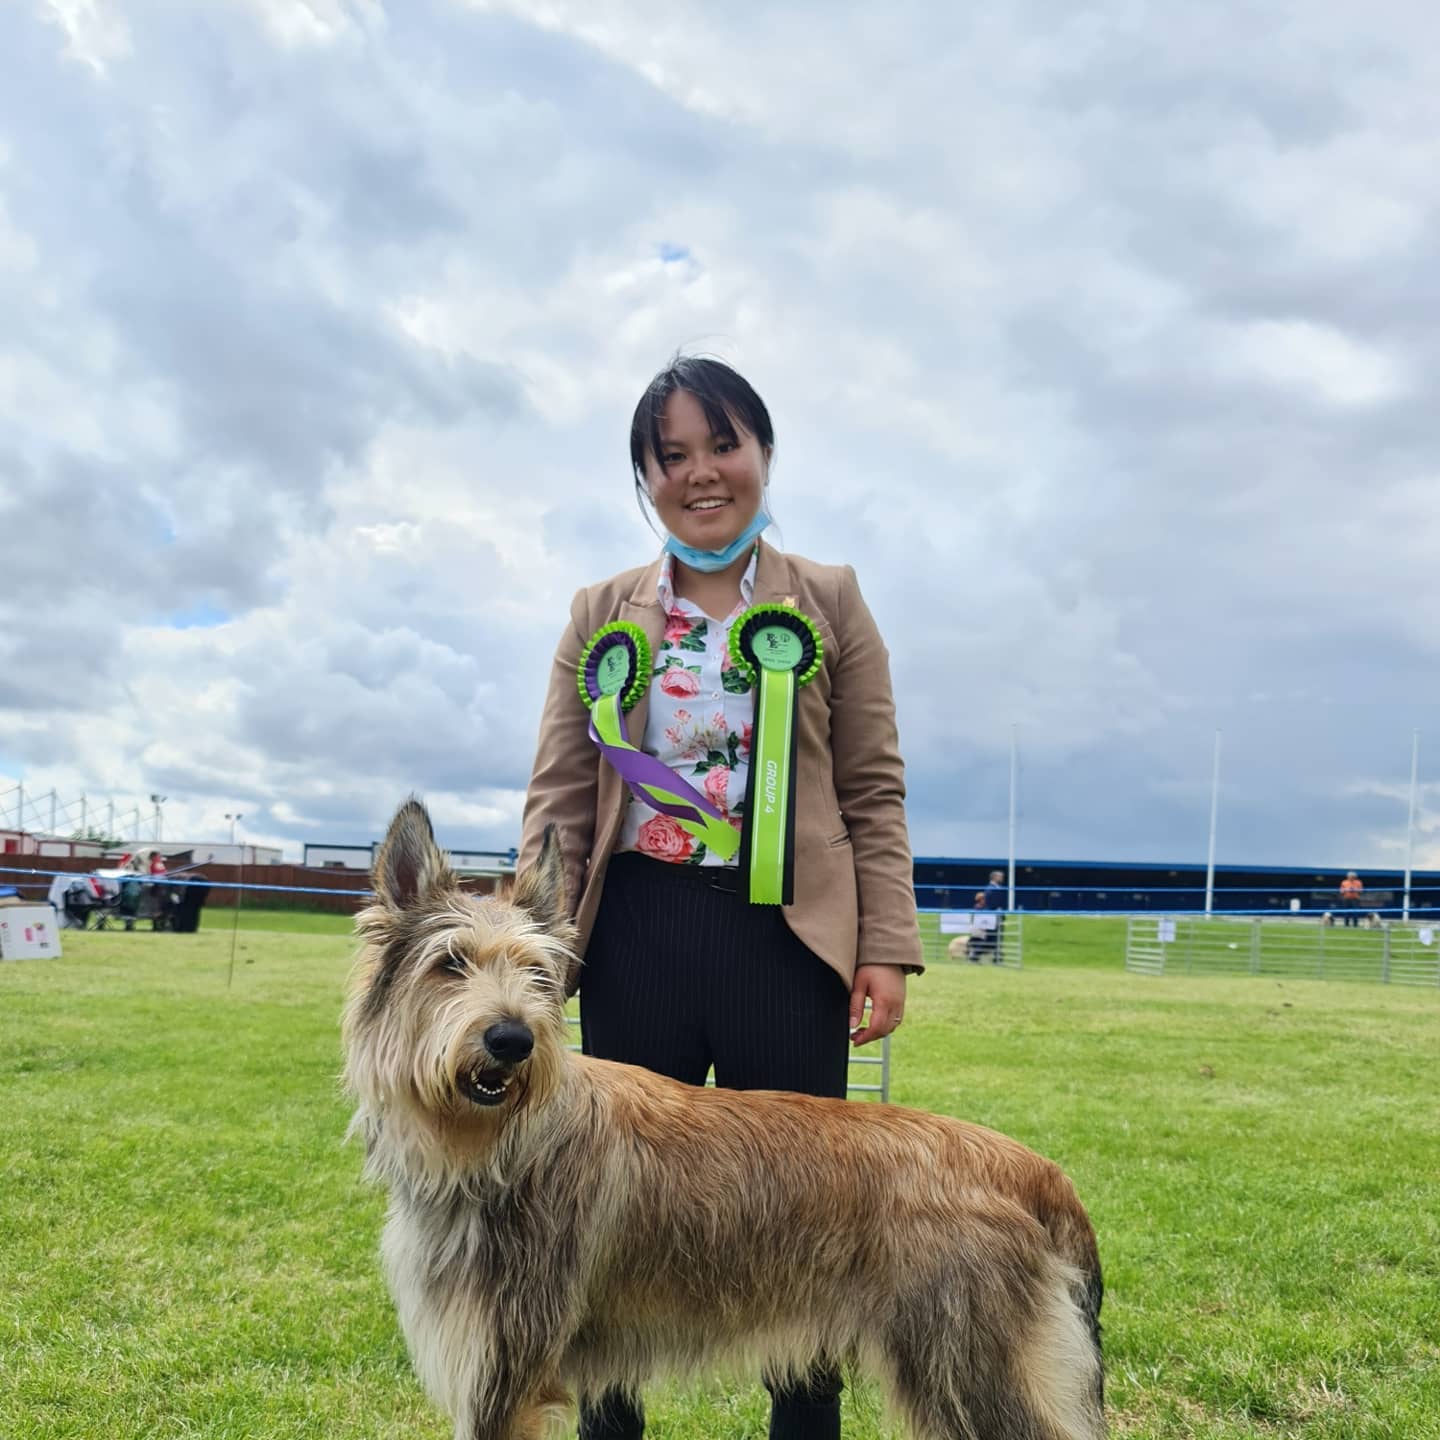 Picardy Sheepdog / Berger Picard at East of England Open Show